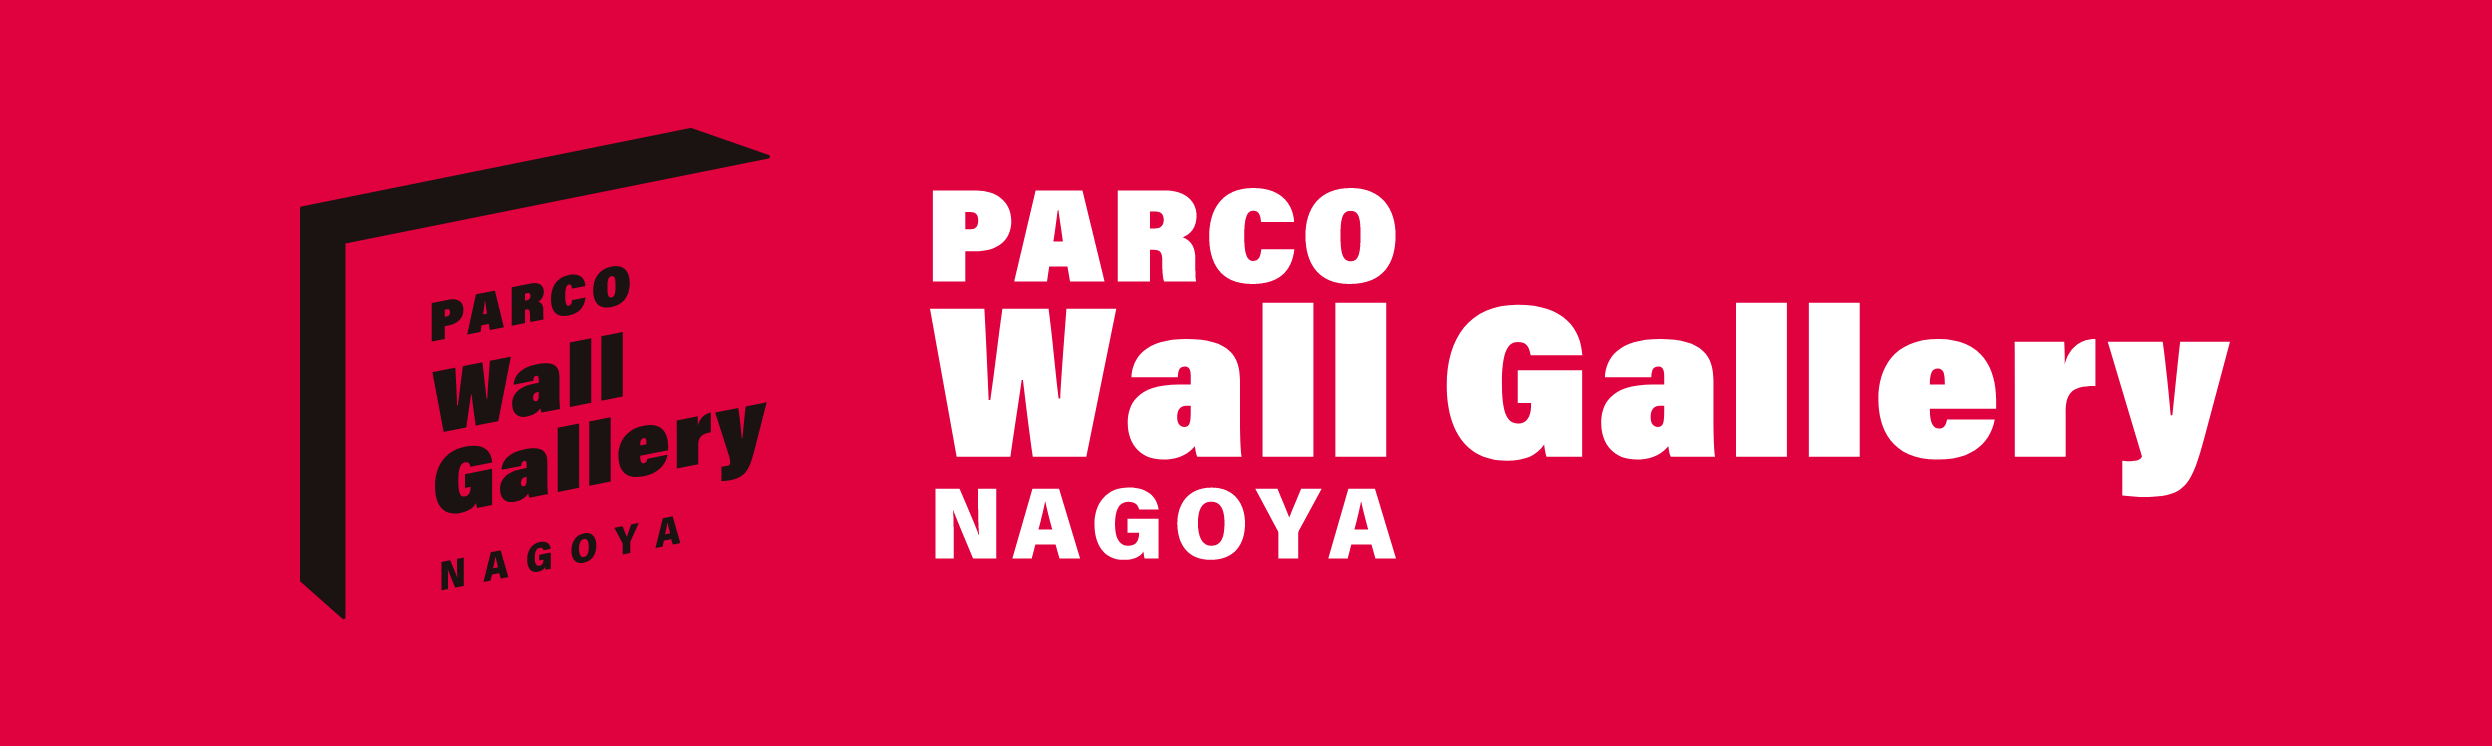 PARCO Wall Gallery